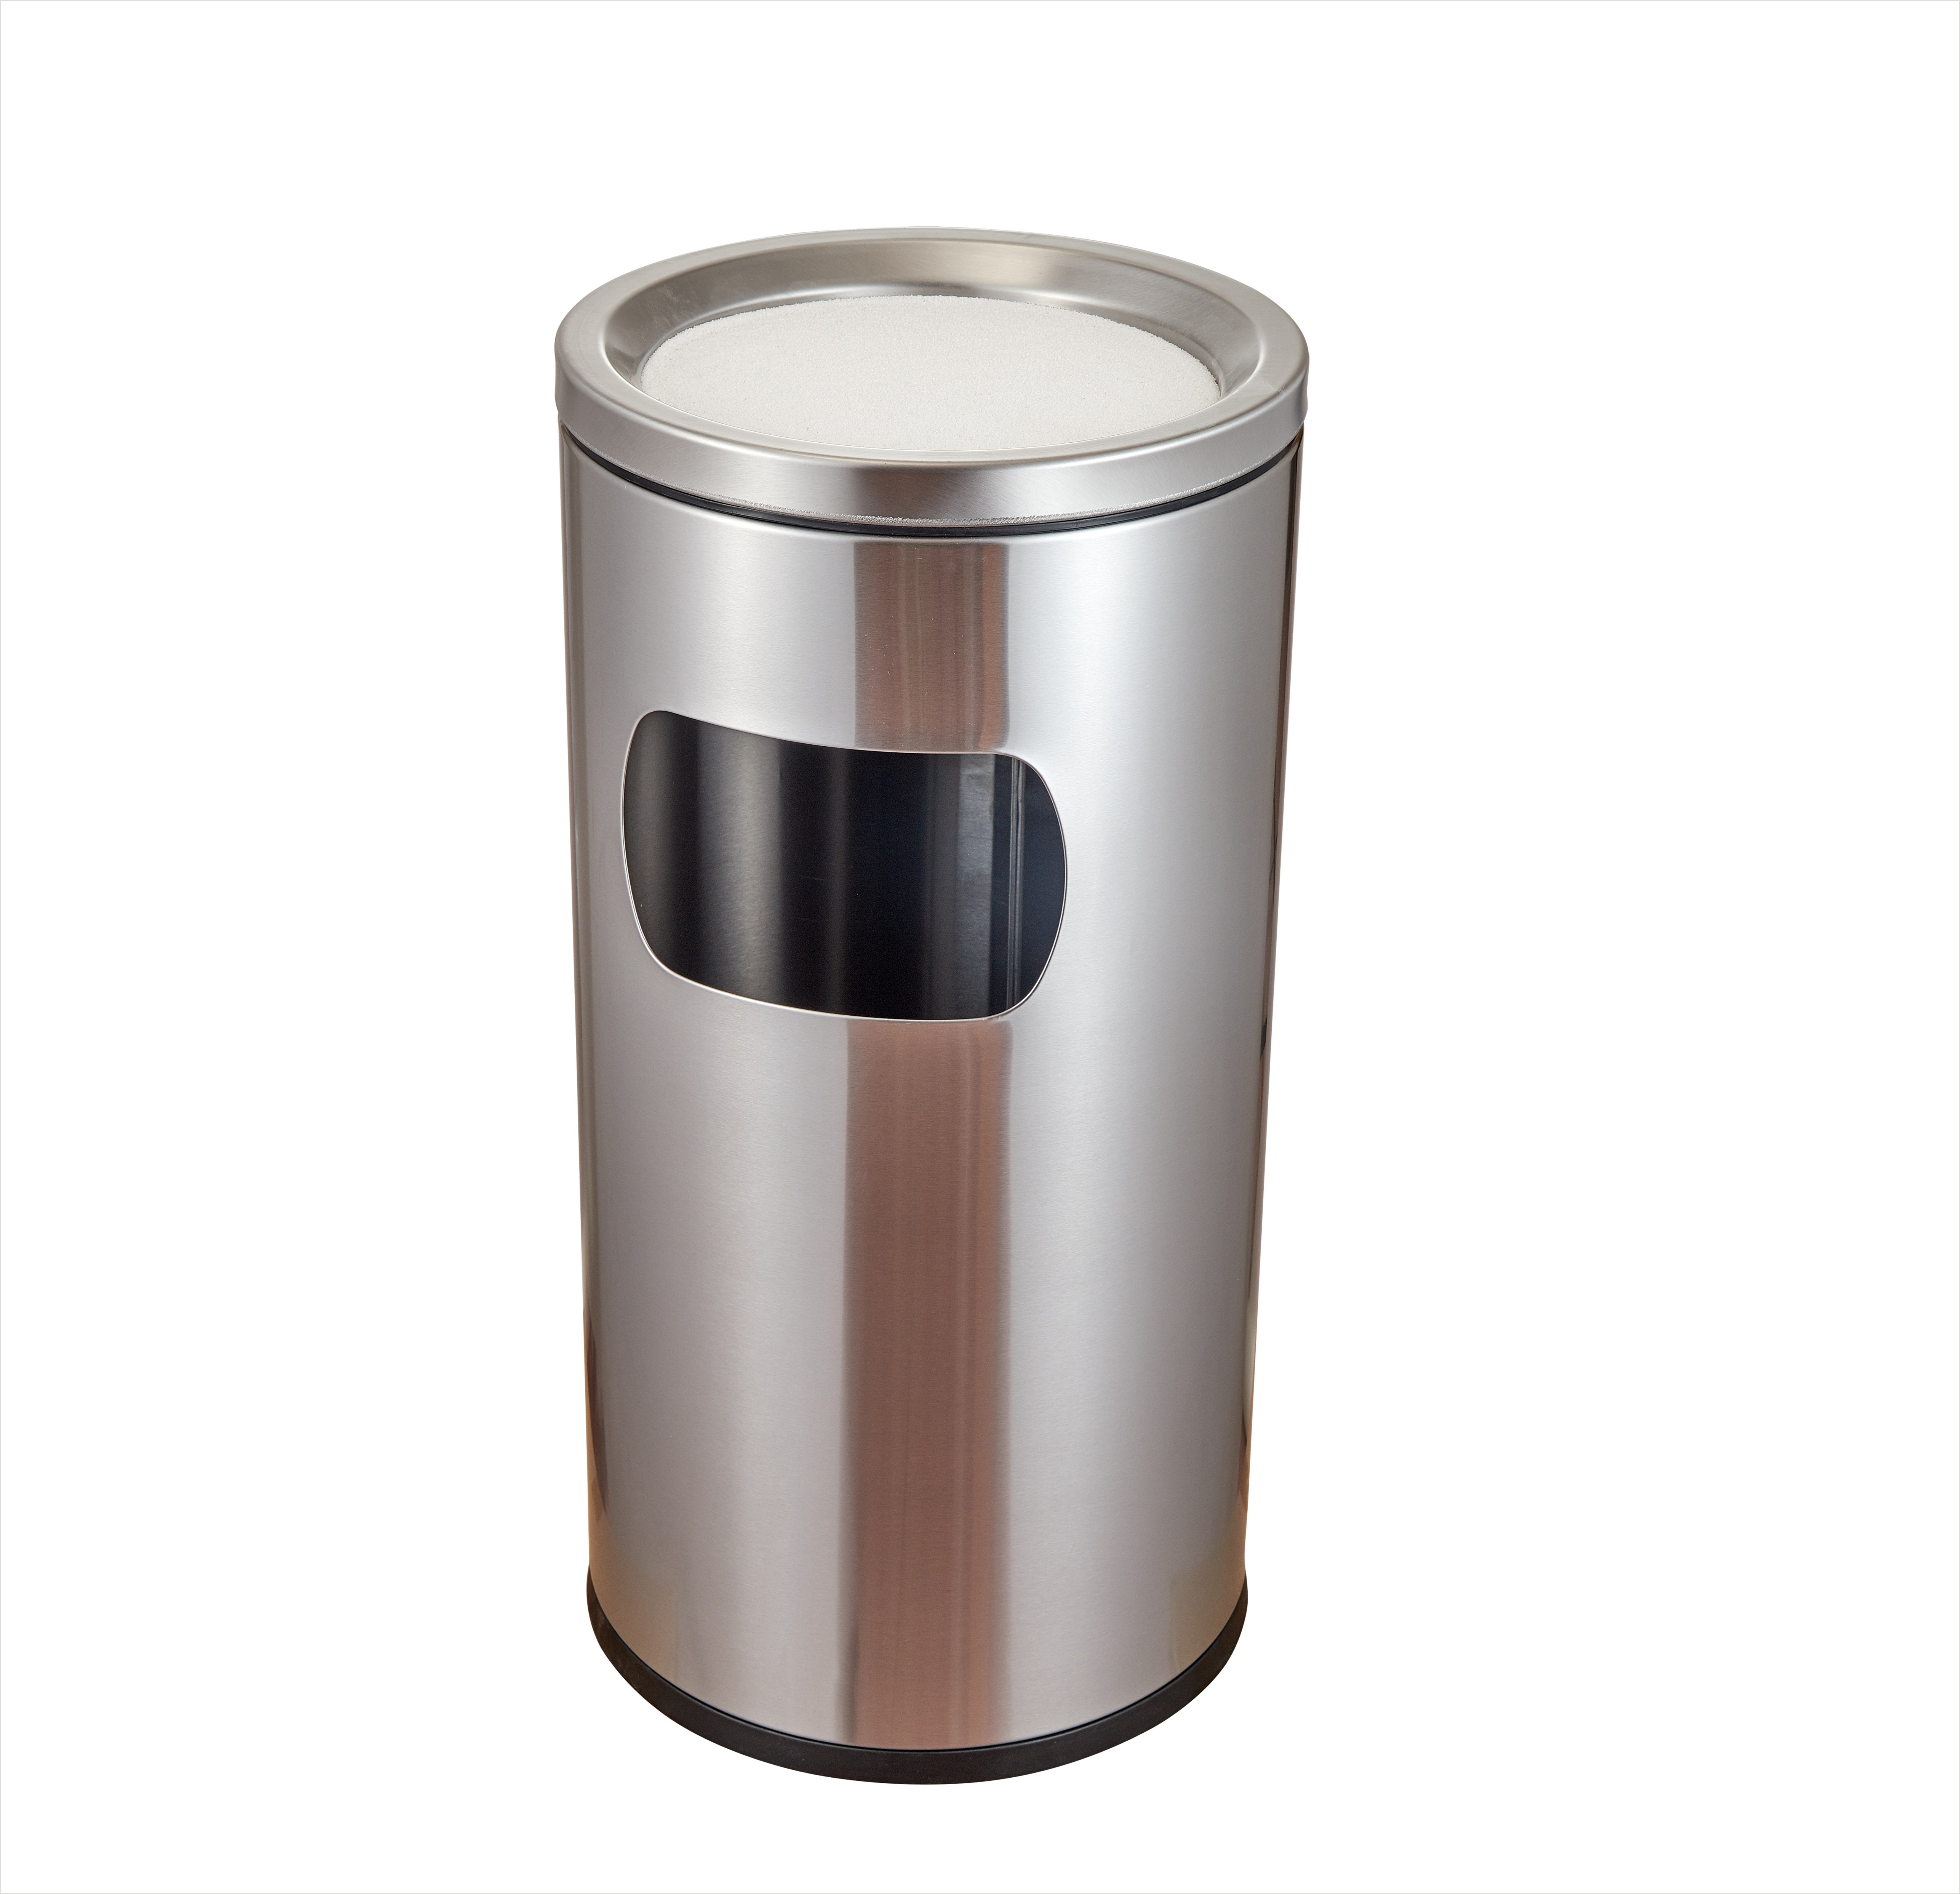 Rounded Stainless Steel Trash can with side open window 